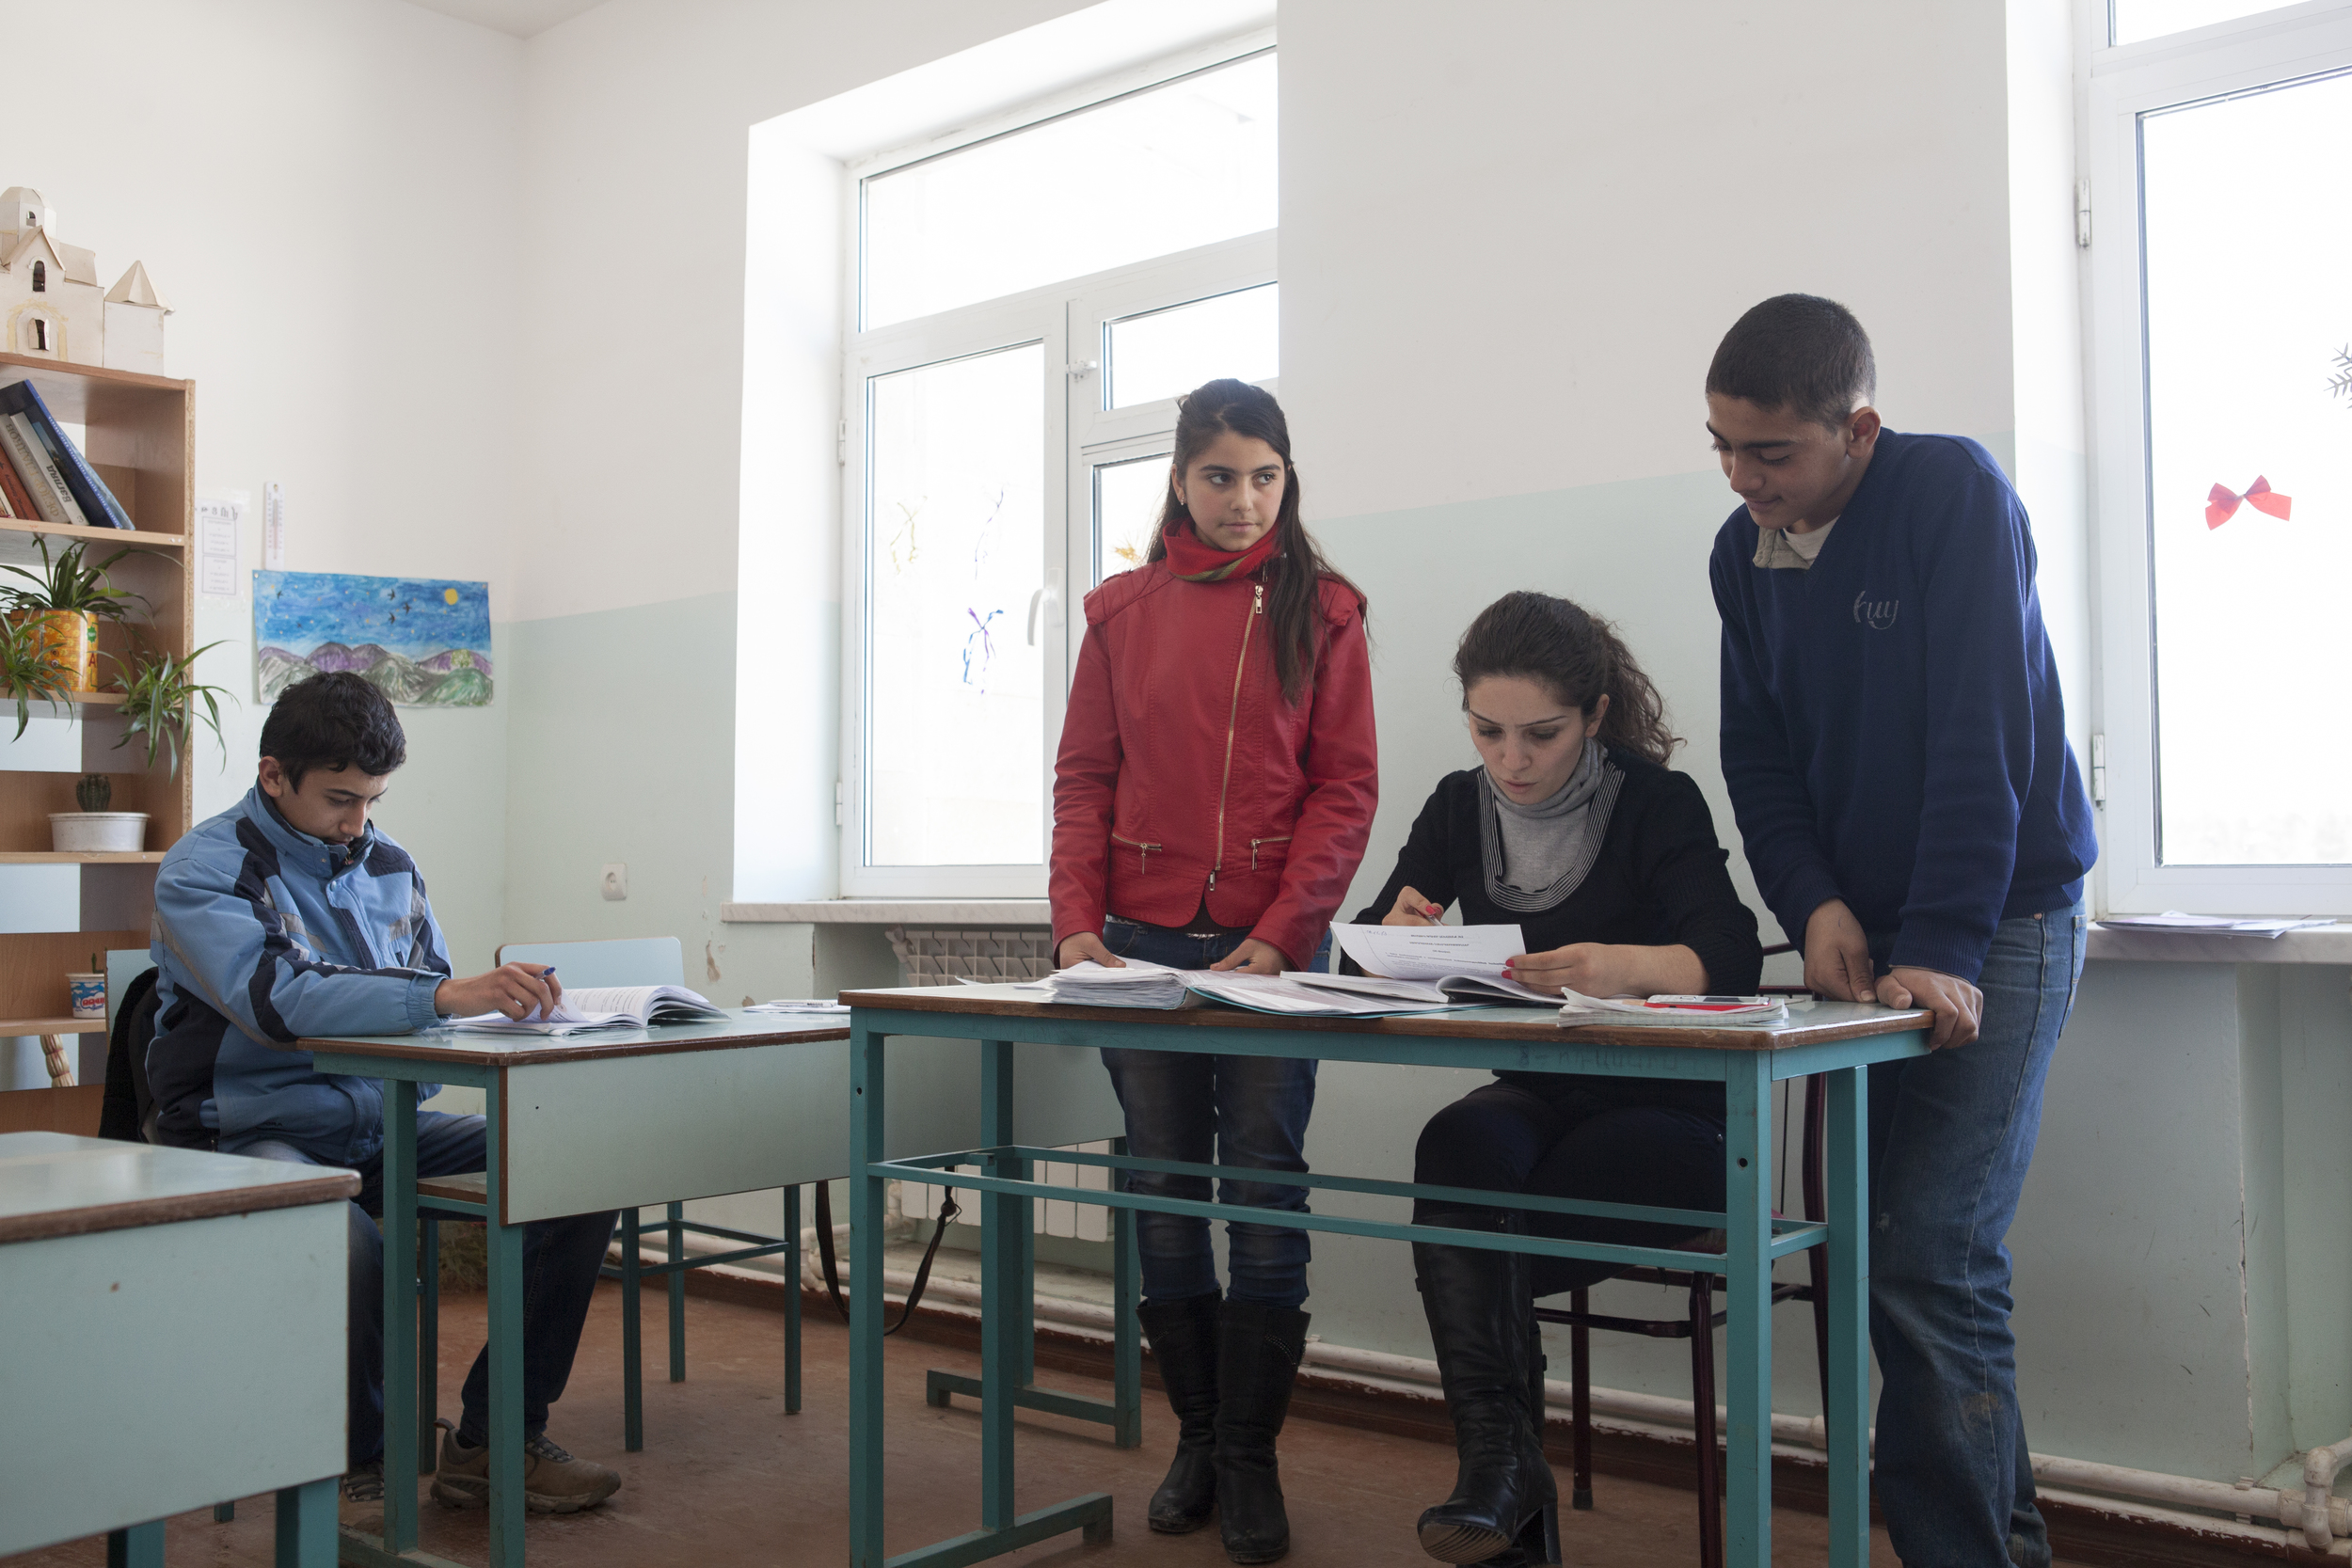  A Syrian-Armenian teenager (dressed in blue)&nbsp;among local classmates in the Kashatagh region of Nagorno-Karabakh.&nbsp; 